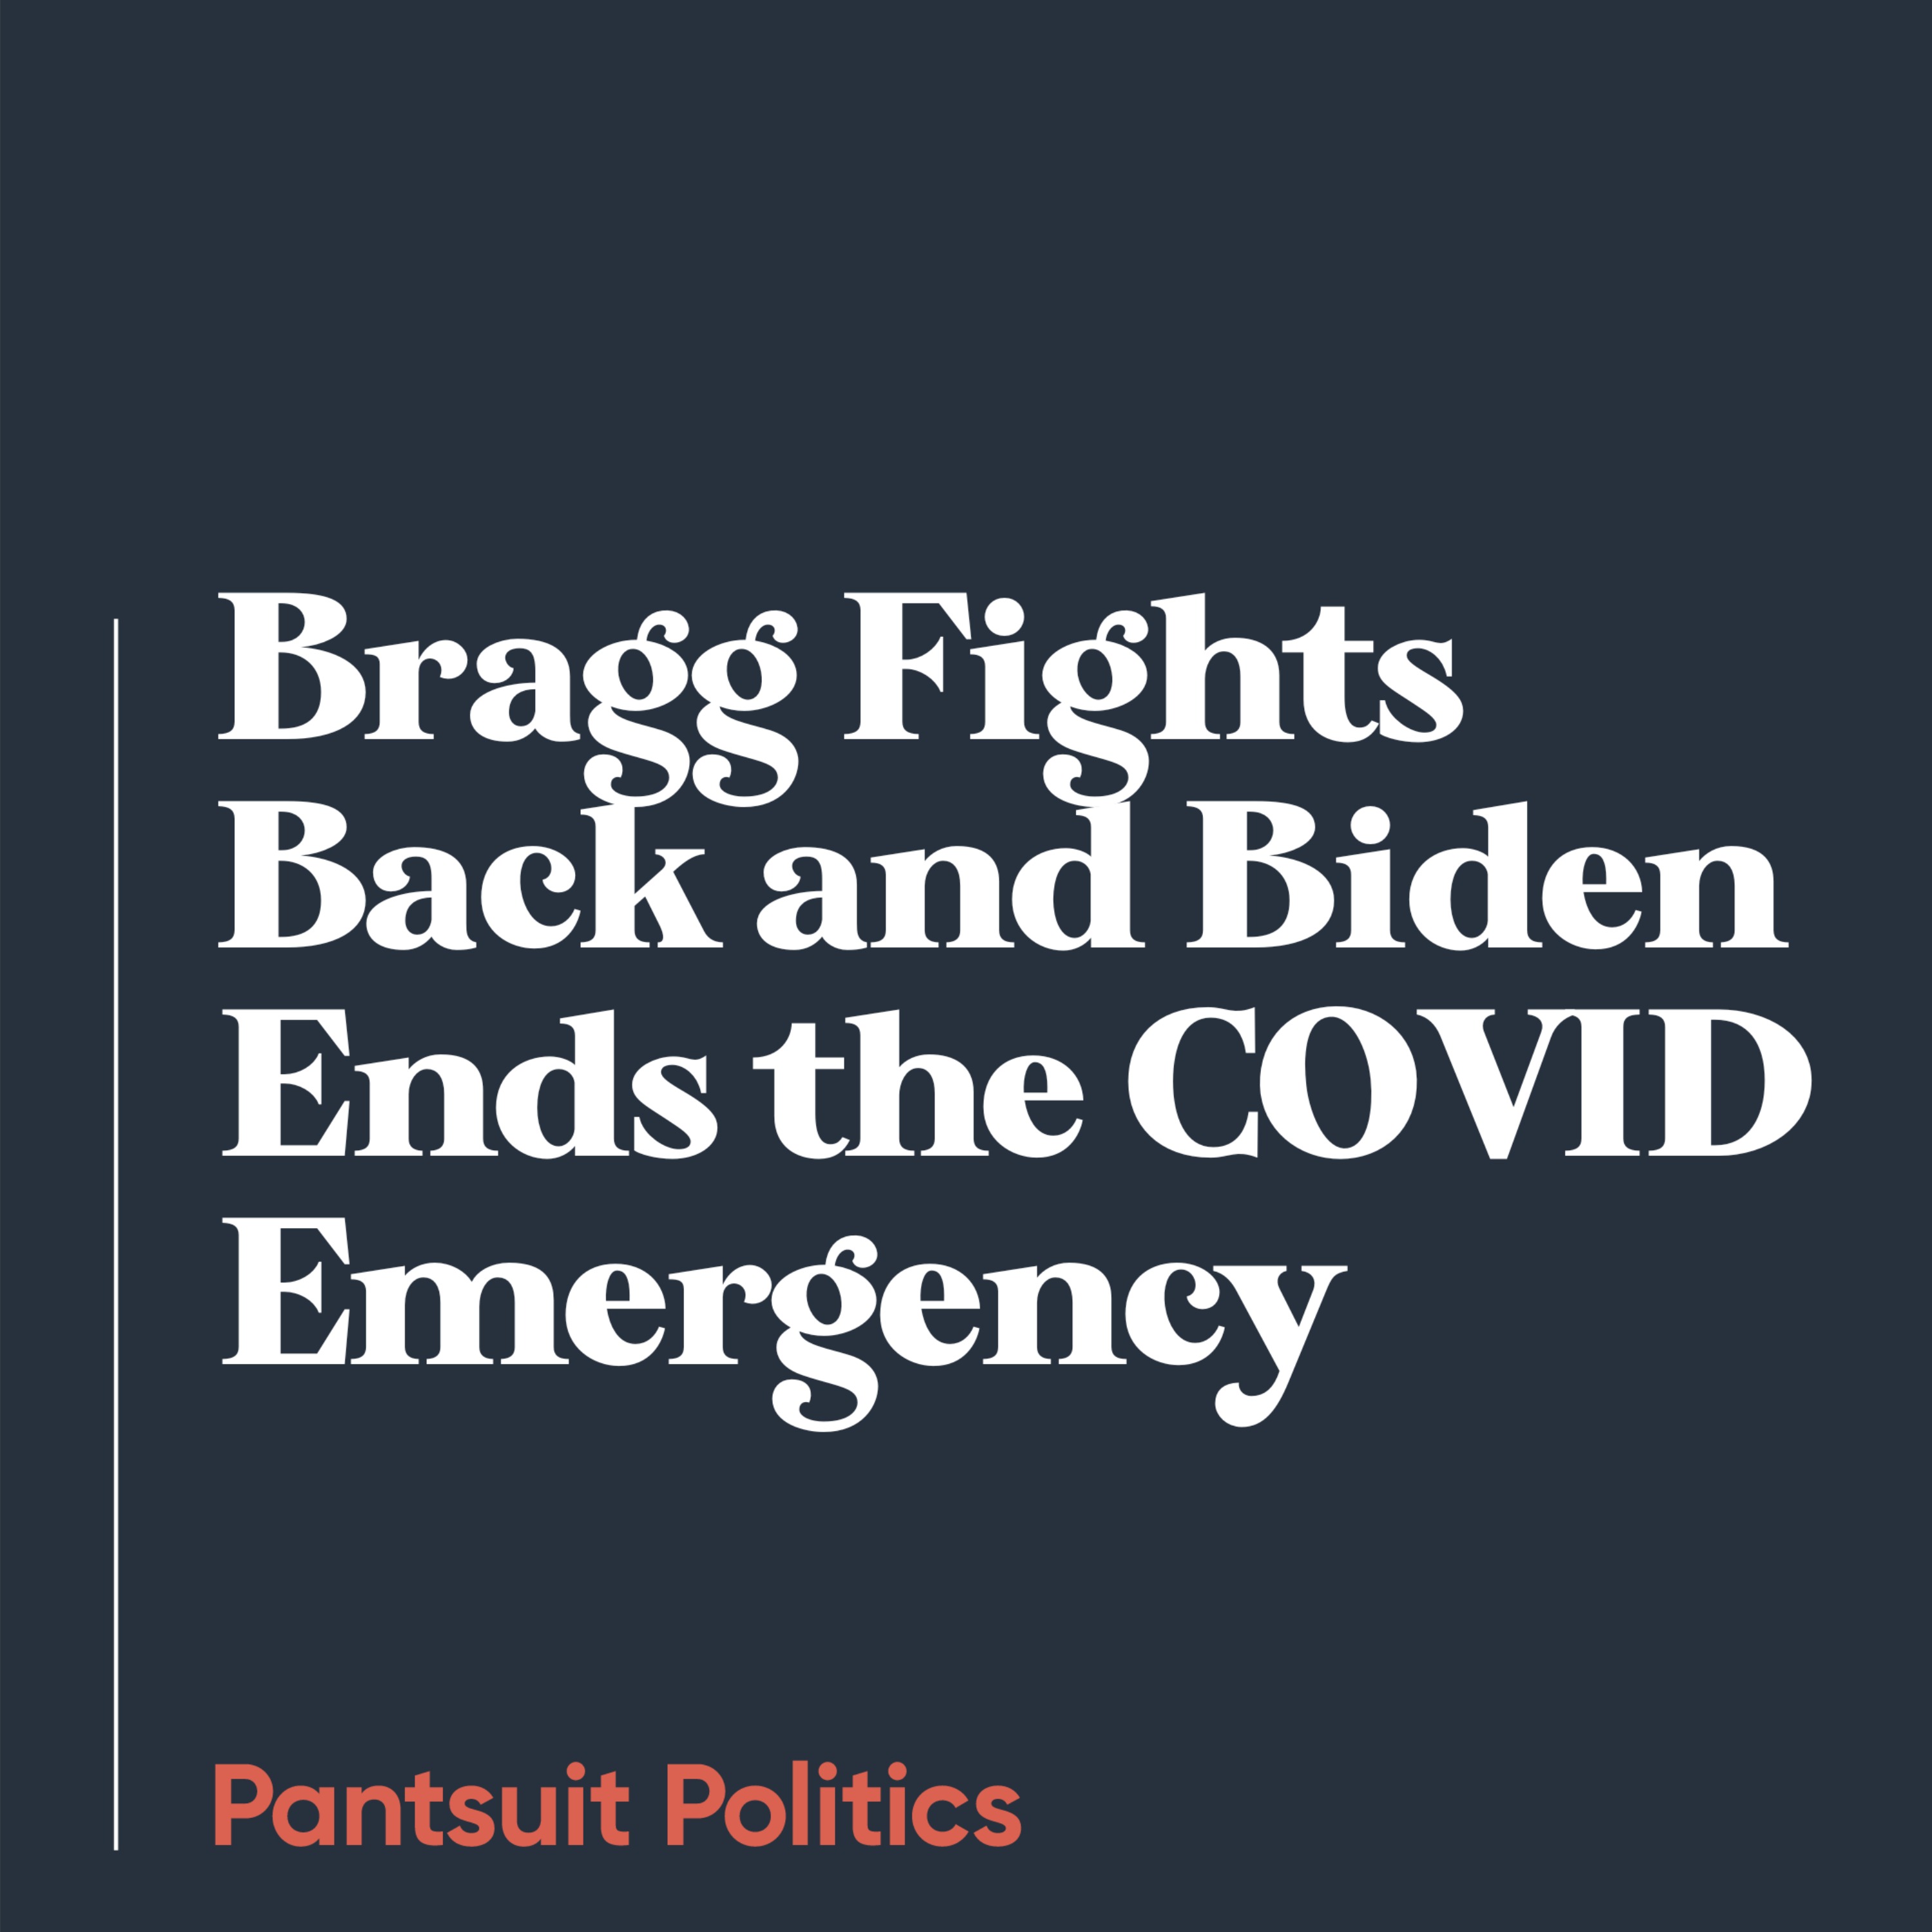 Bragg Fights Back and Biden Ends the COVID Emergency